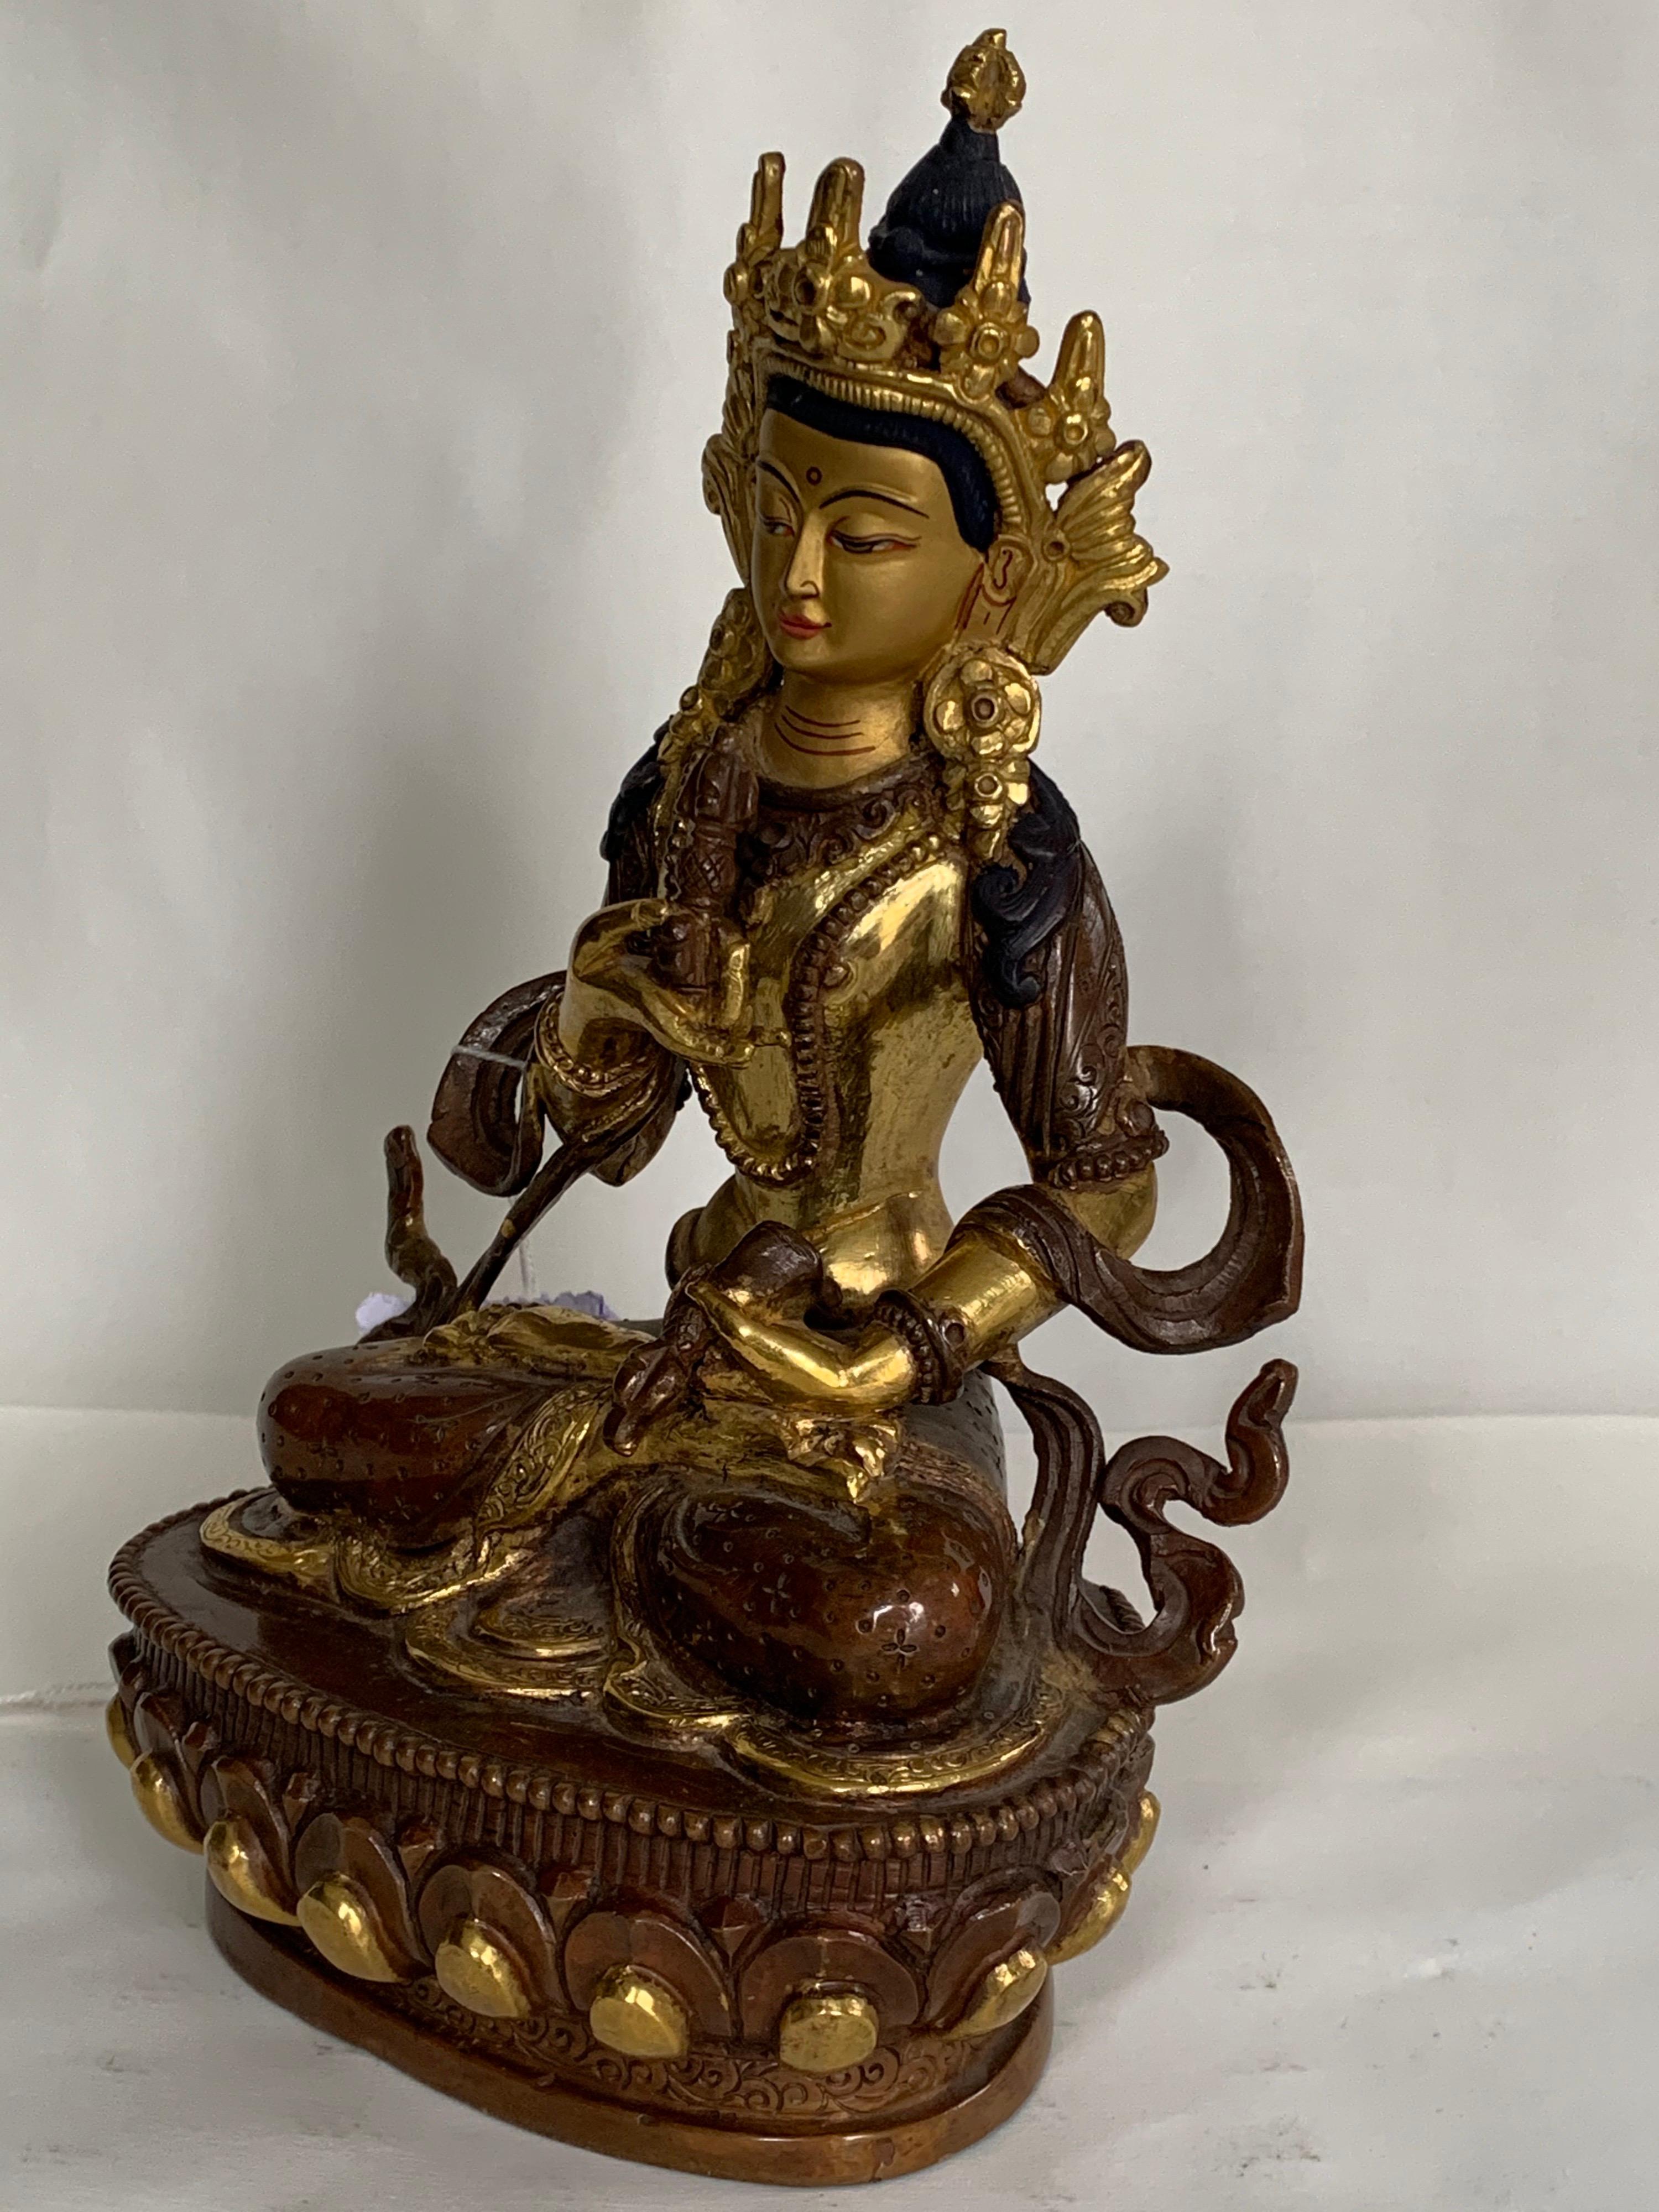 Vajrasattva Statue 7.5 Inch with 24K Gold Handcrafted by Lost Wax Process - Sculpture by Unknown